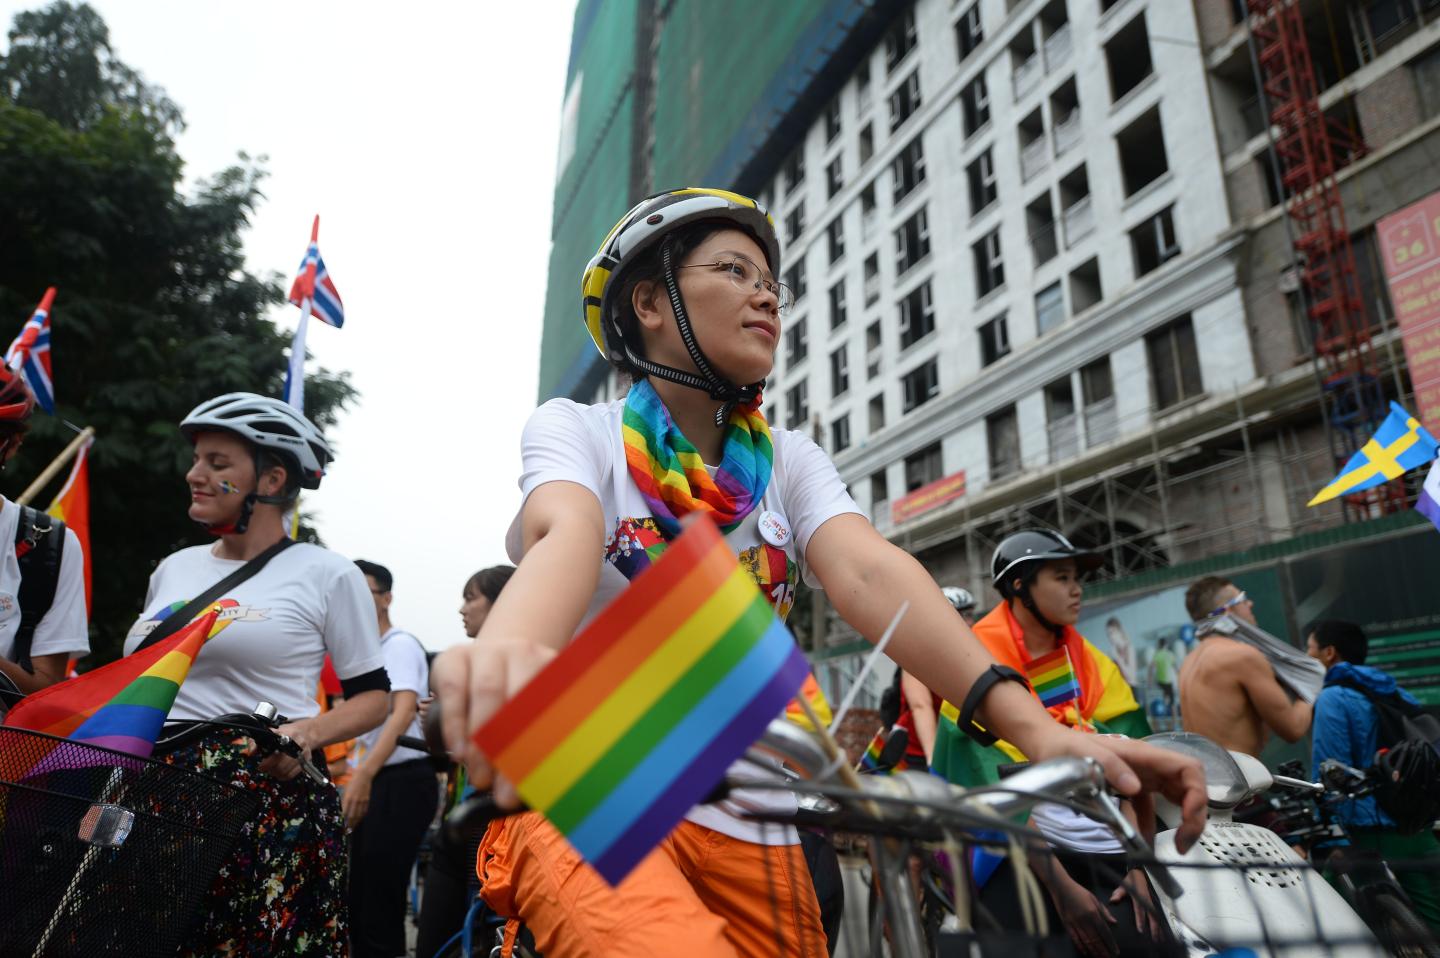 Women riding bikes with rainbow flags attached to them at a Vietnamese Pride festival